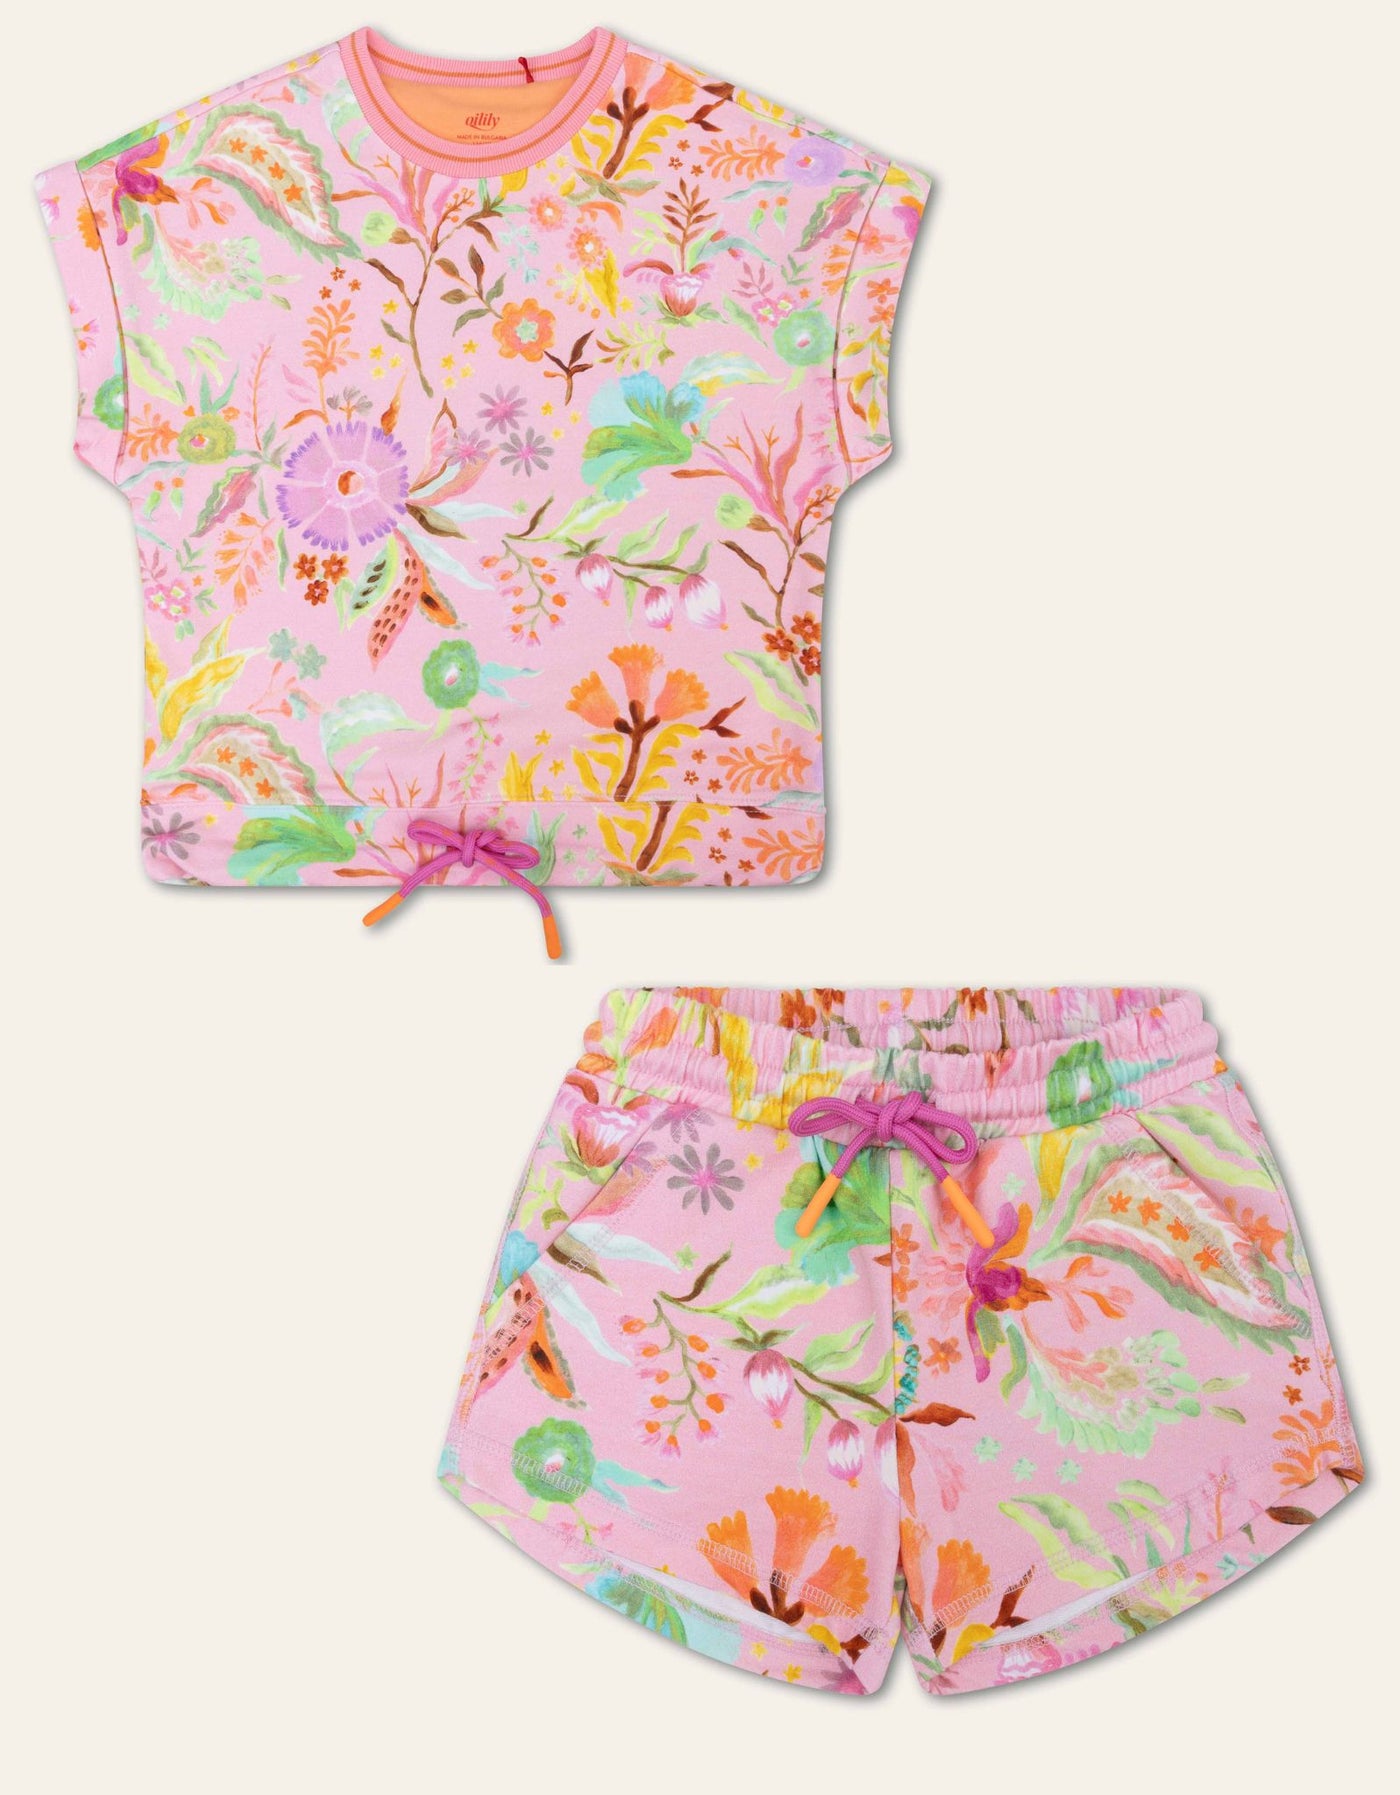 Pink Floral Sweater and Shorts Set by Oilily